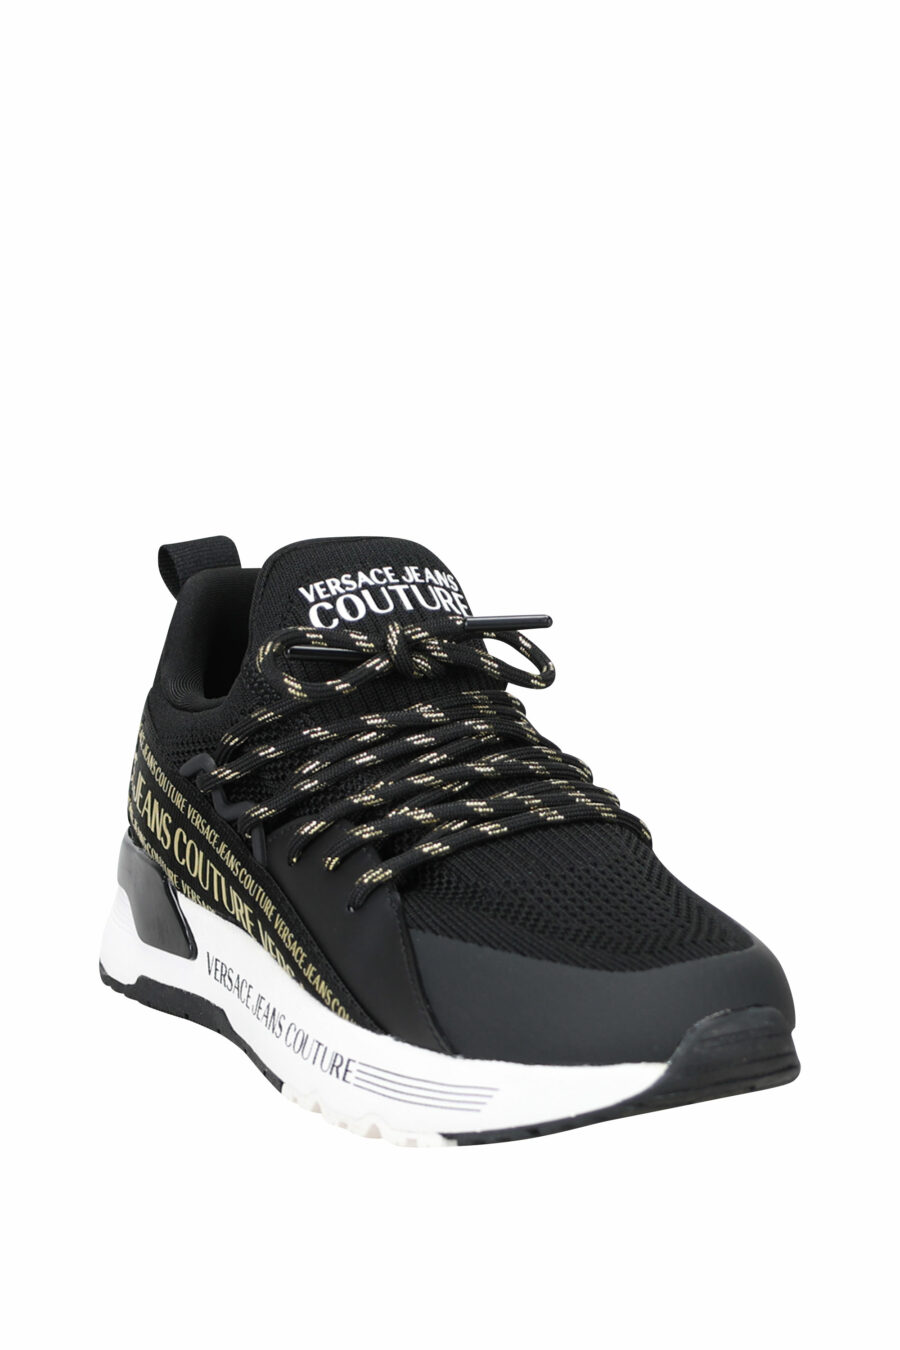 Black "troadlop" trainers with gold ribbon logo - 8052019454222 1